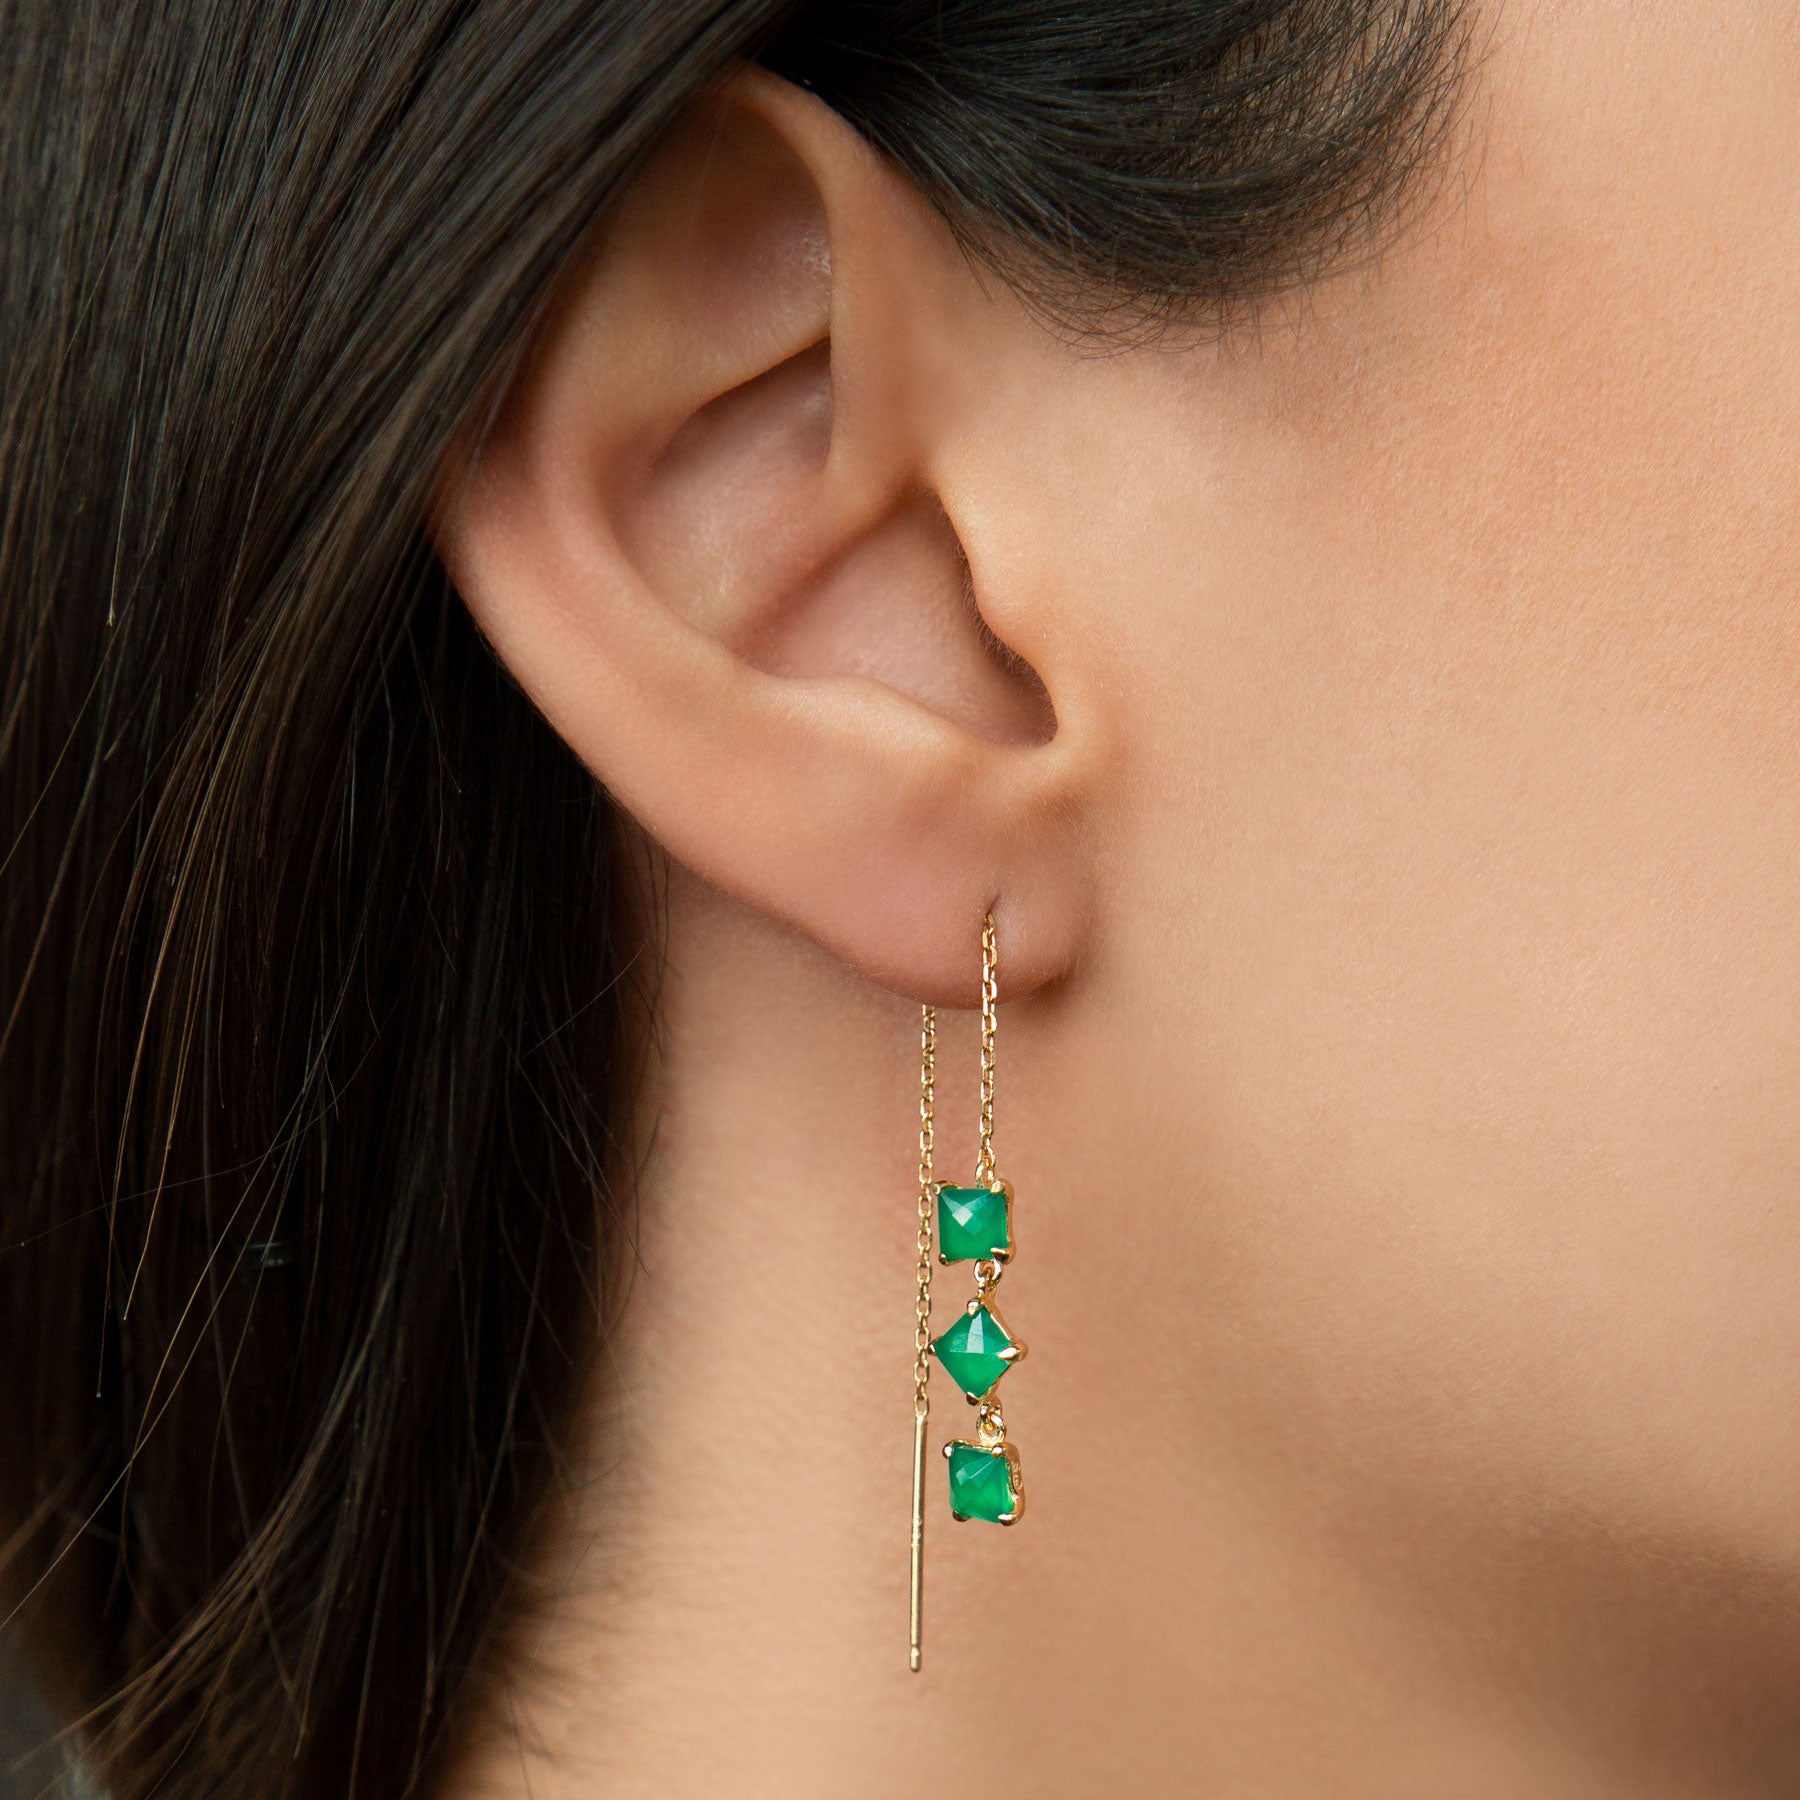 GREEN ONIX EARRINGS WITH CHAIN SET IN 925 SILVER GOLD PLATED